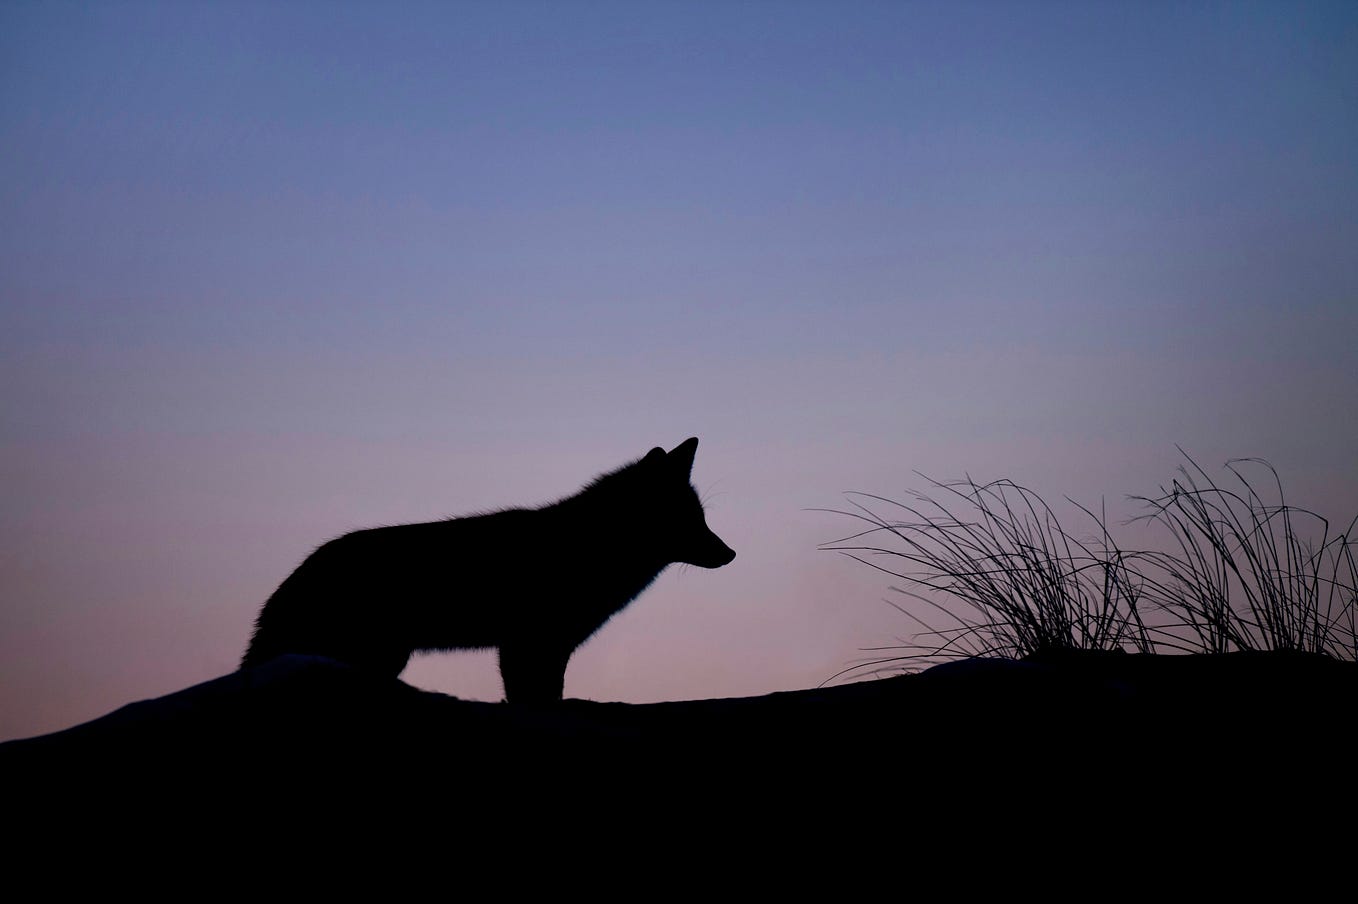 a lone wolf to illustrate the article about the myth of isolation as an ex-introvert